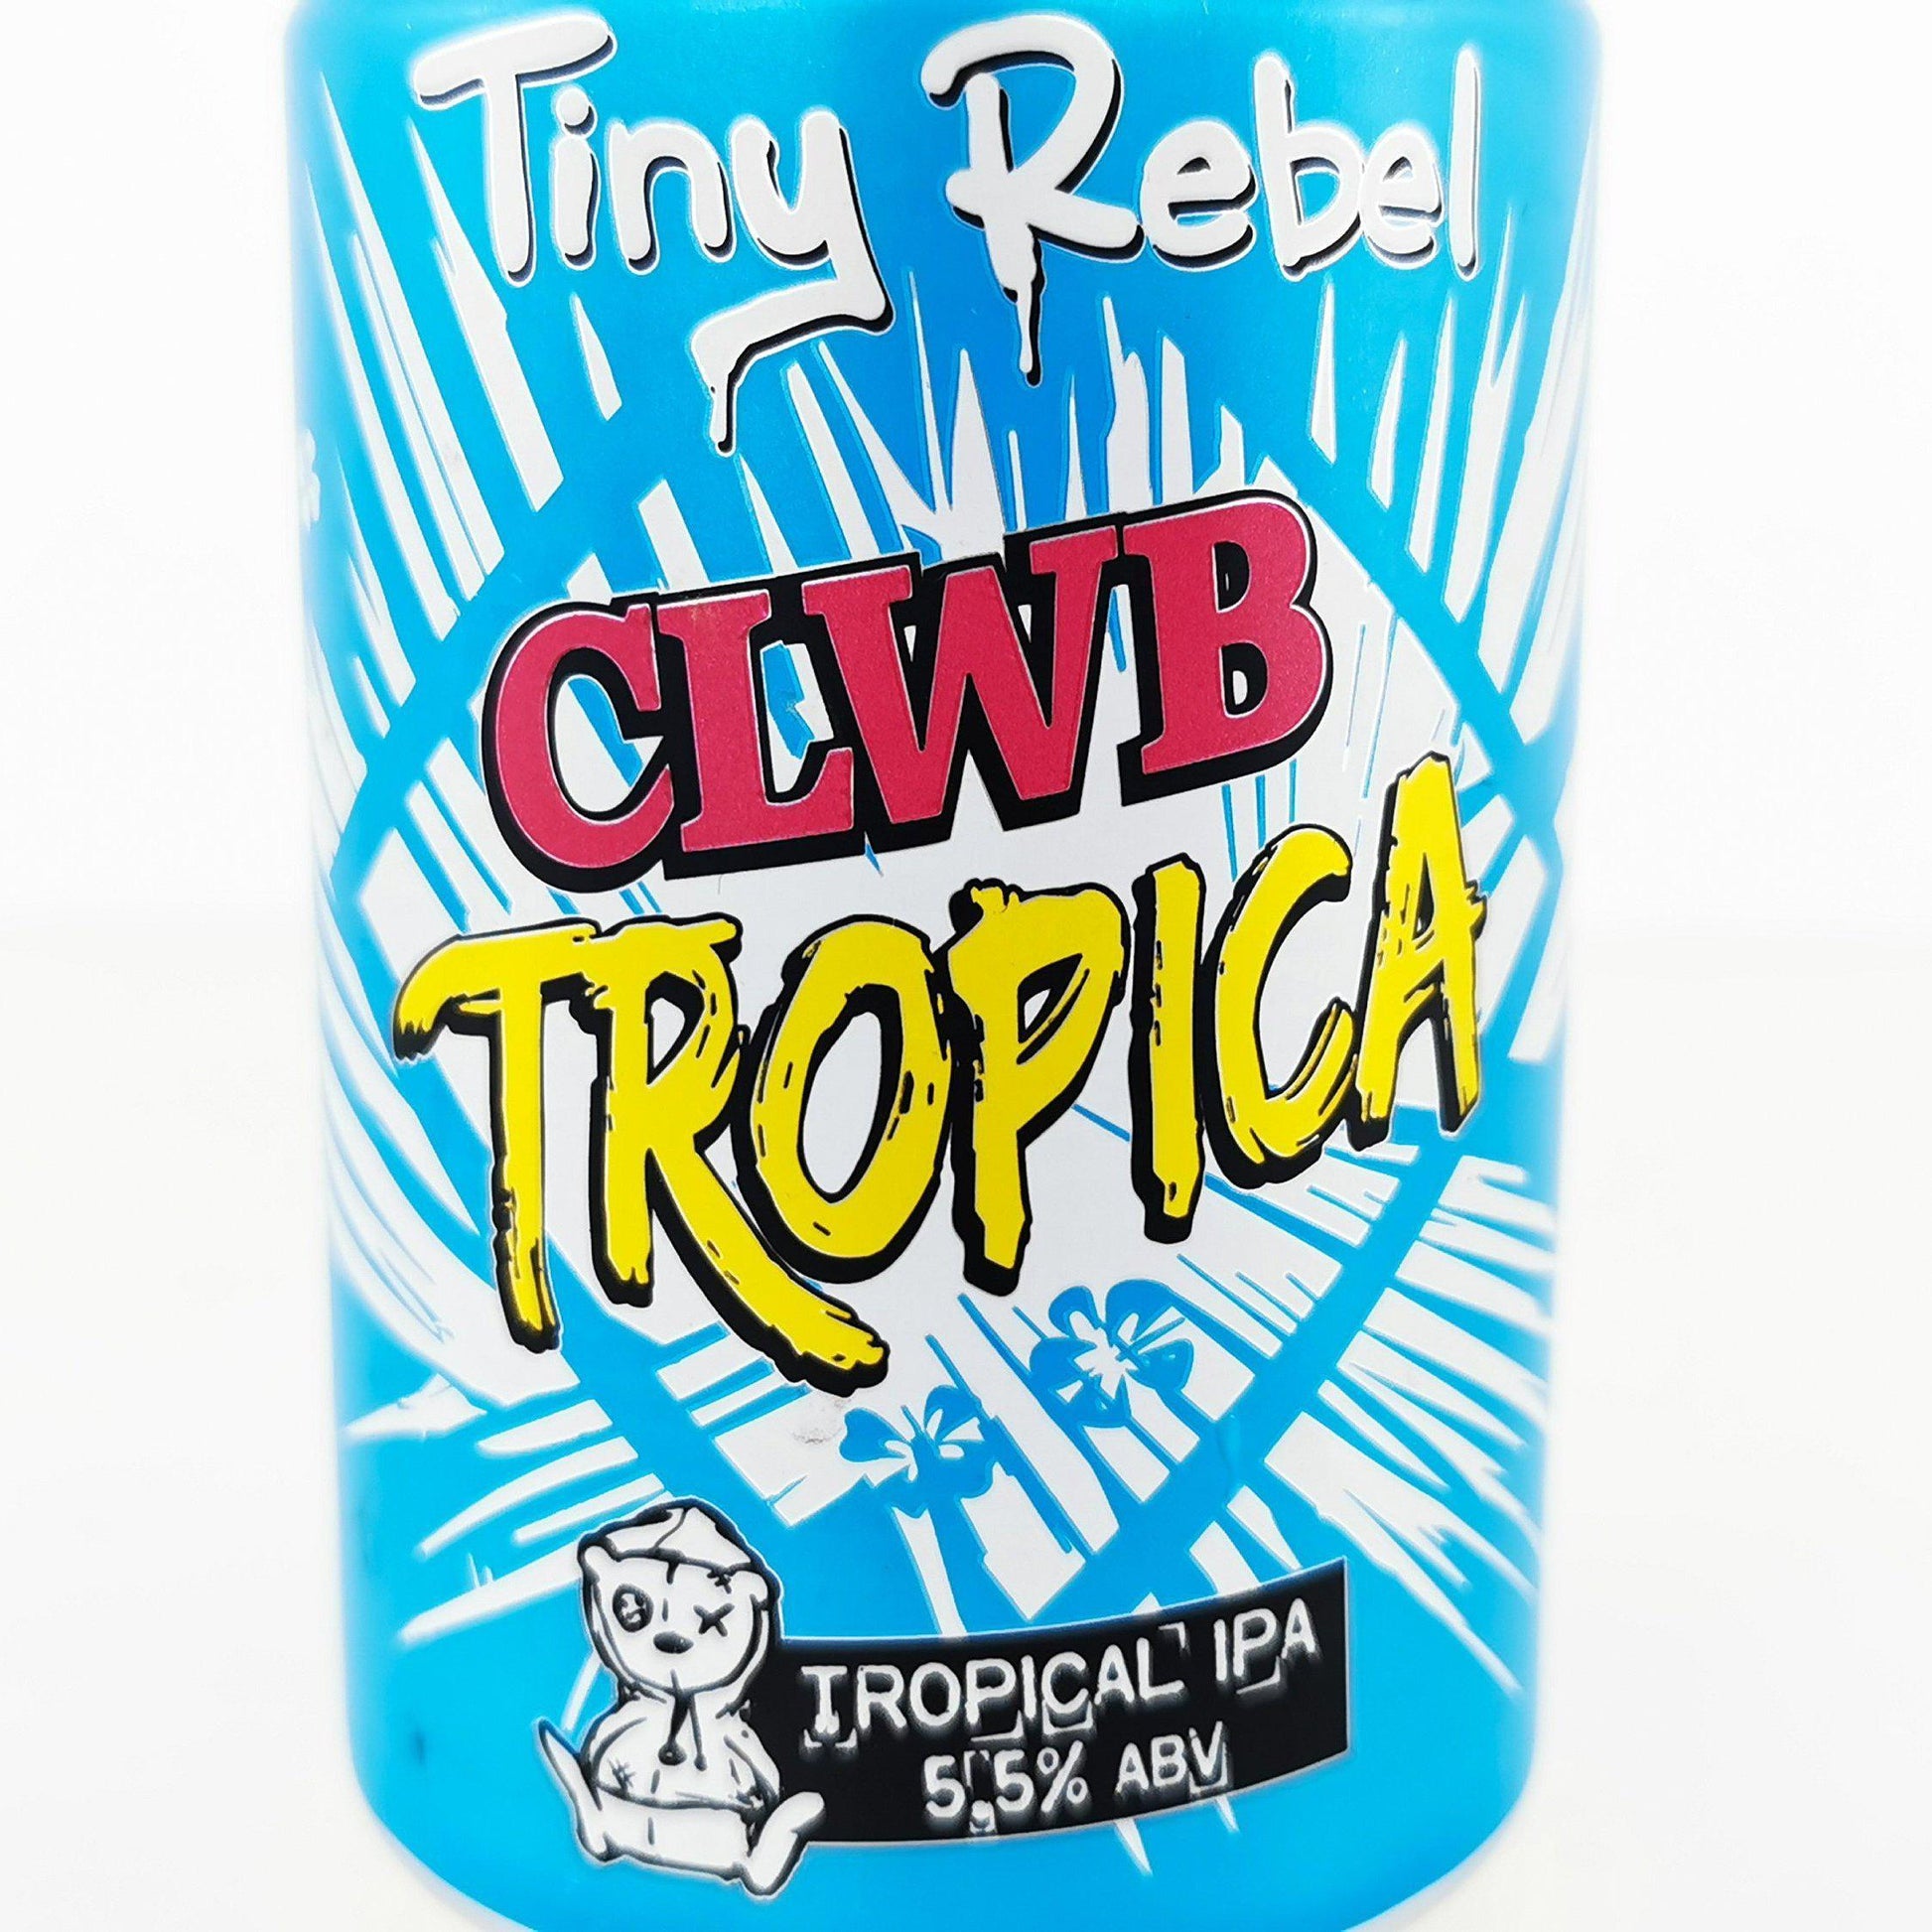 Tiny Rebel Clwb Tropica Craft Beer Can Candle-Beer Can Candles-Adhock Homeware